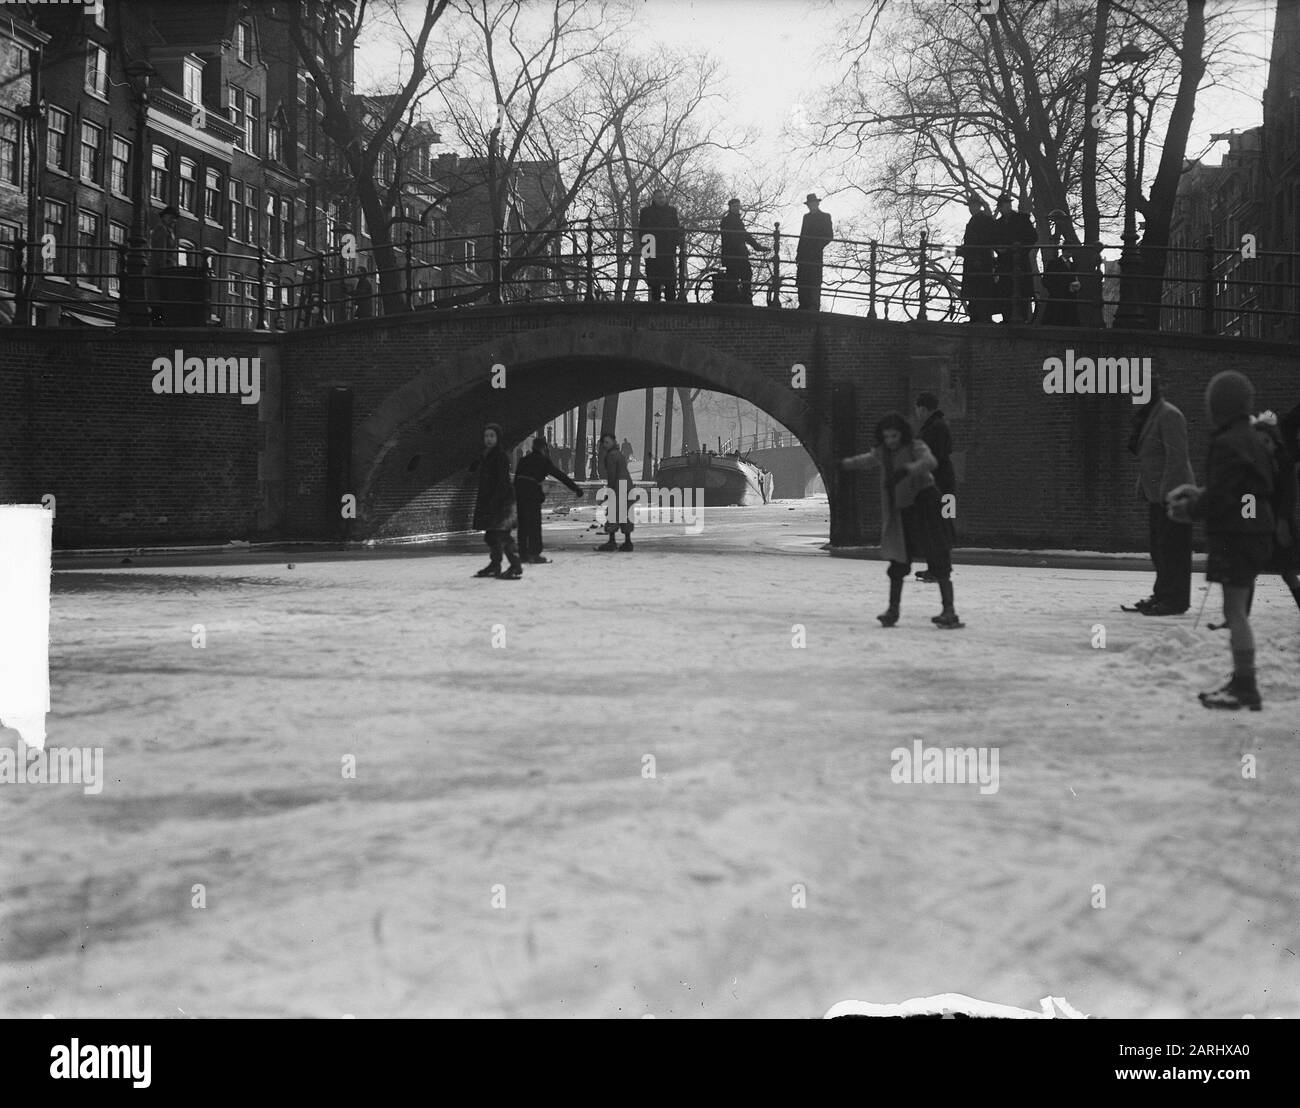 Canals in downtown with ice cream Date: 29 January 1950 Keywords: CANTS, ICE, inner cities Stock Photo